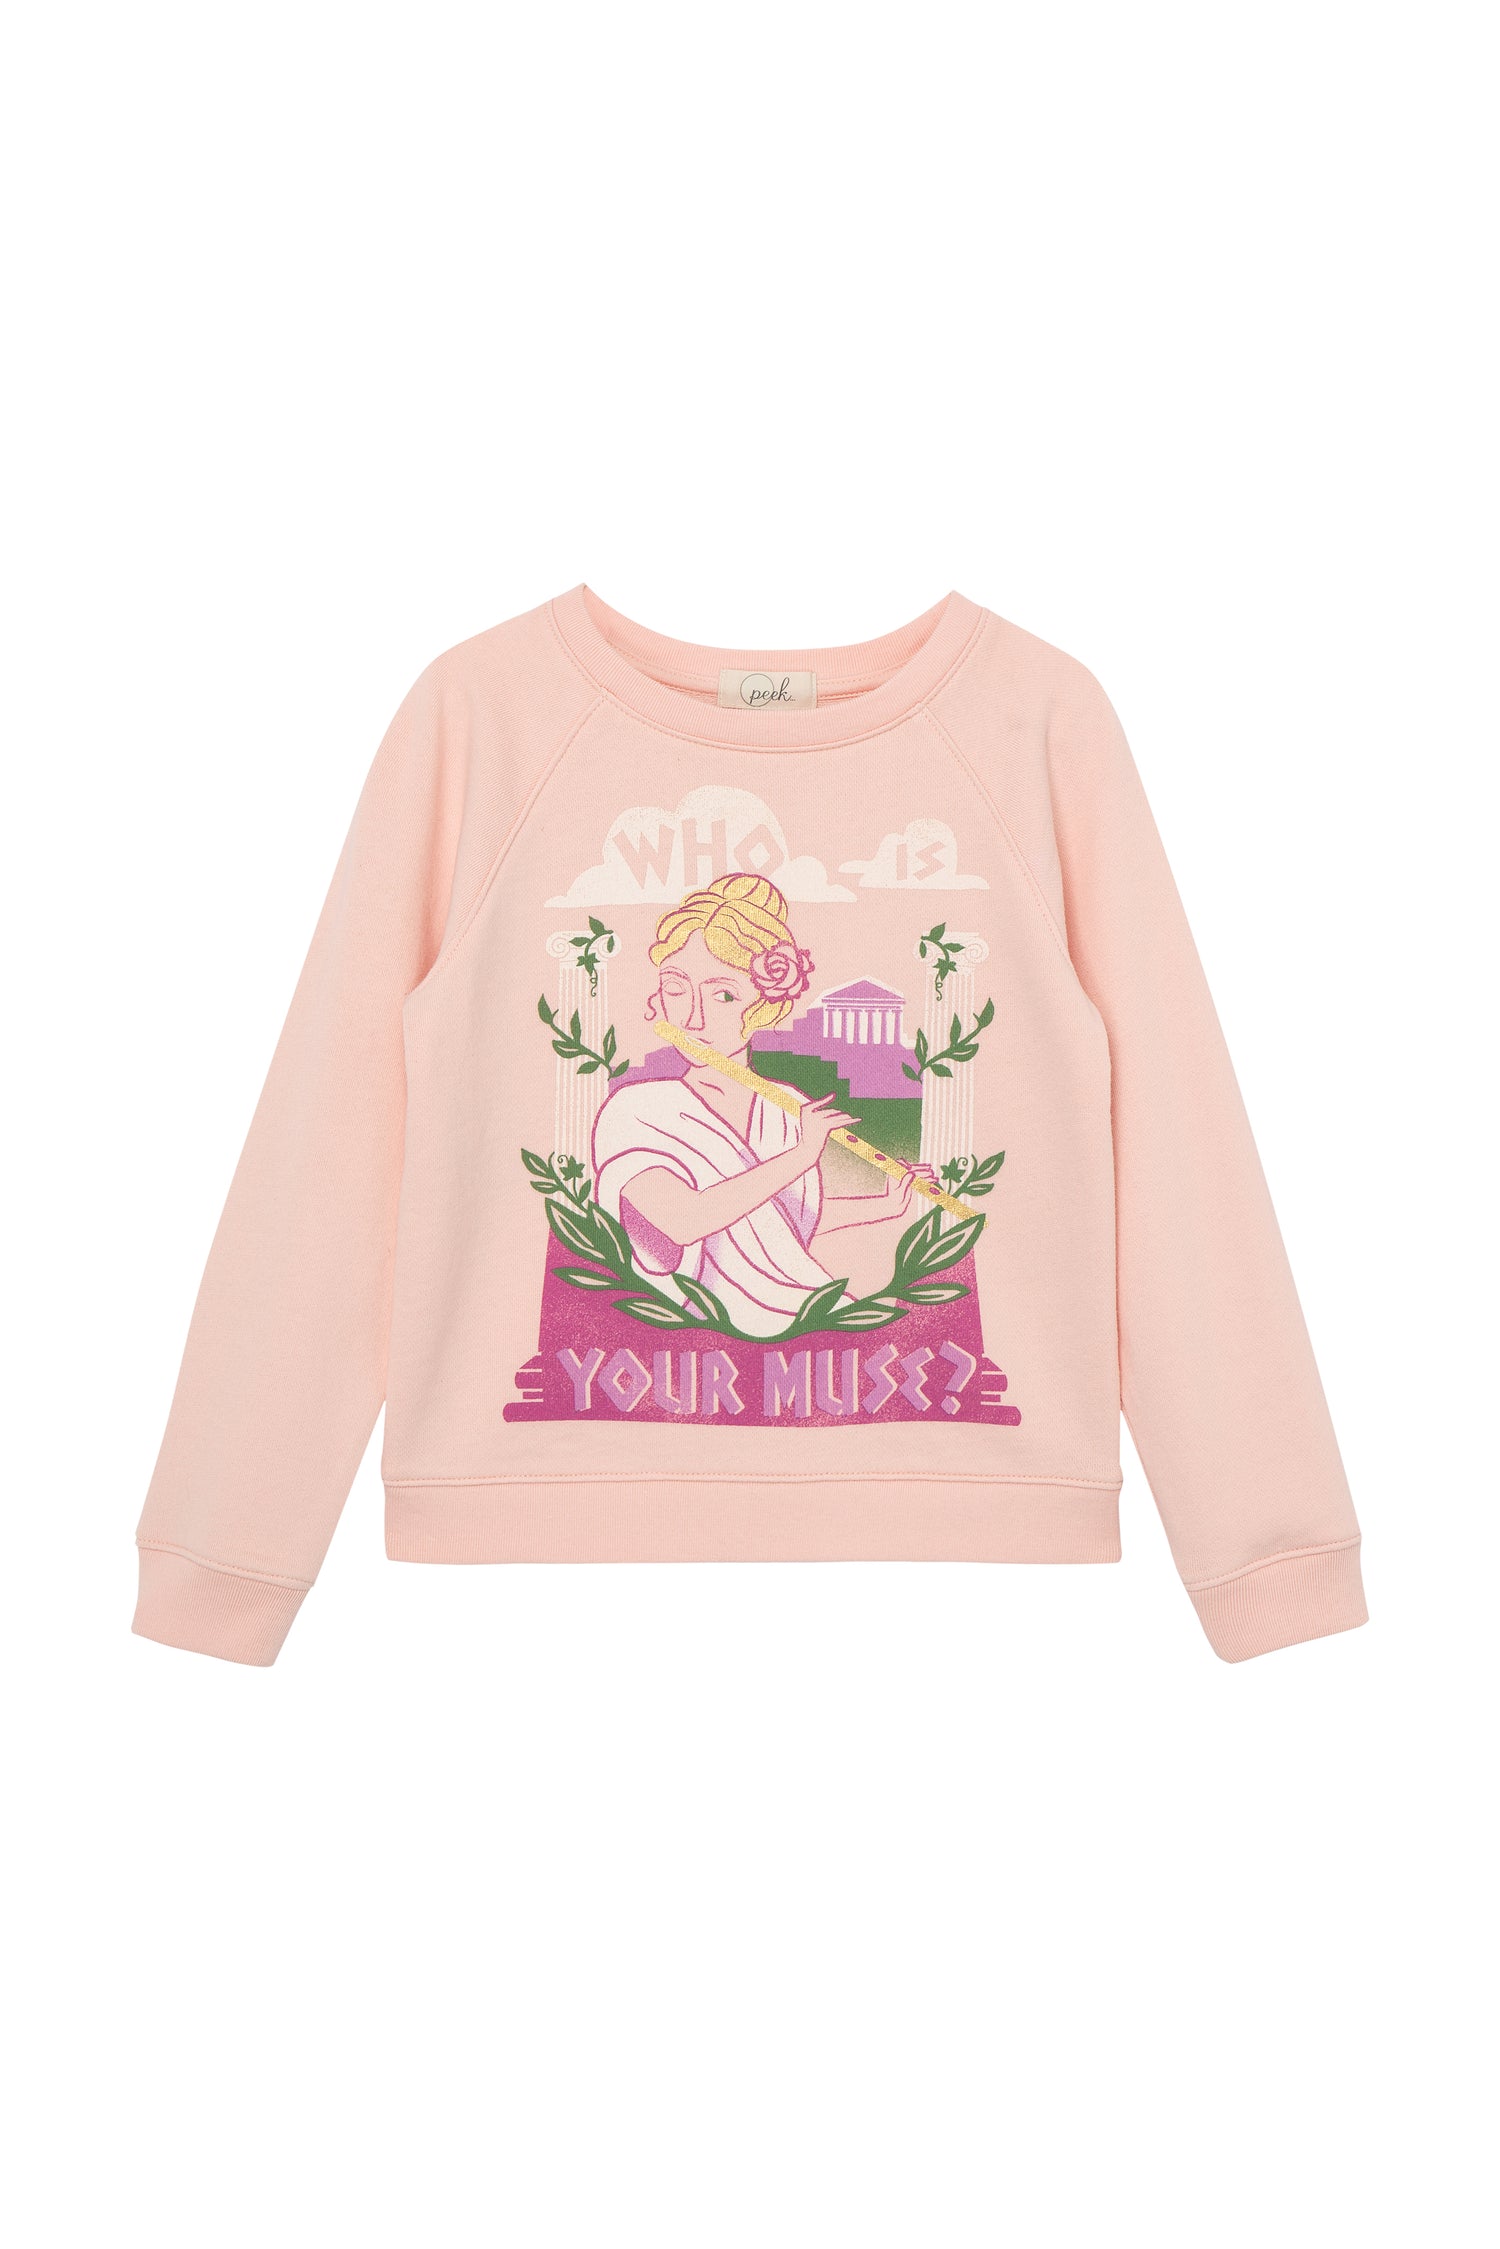 Pink sweatshirt with a print of a Greek woman playing a lute and text 'Who Is Your Muse?'